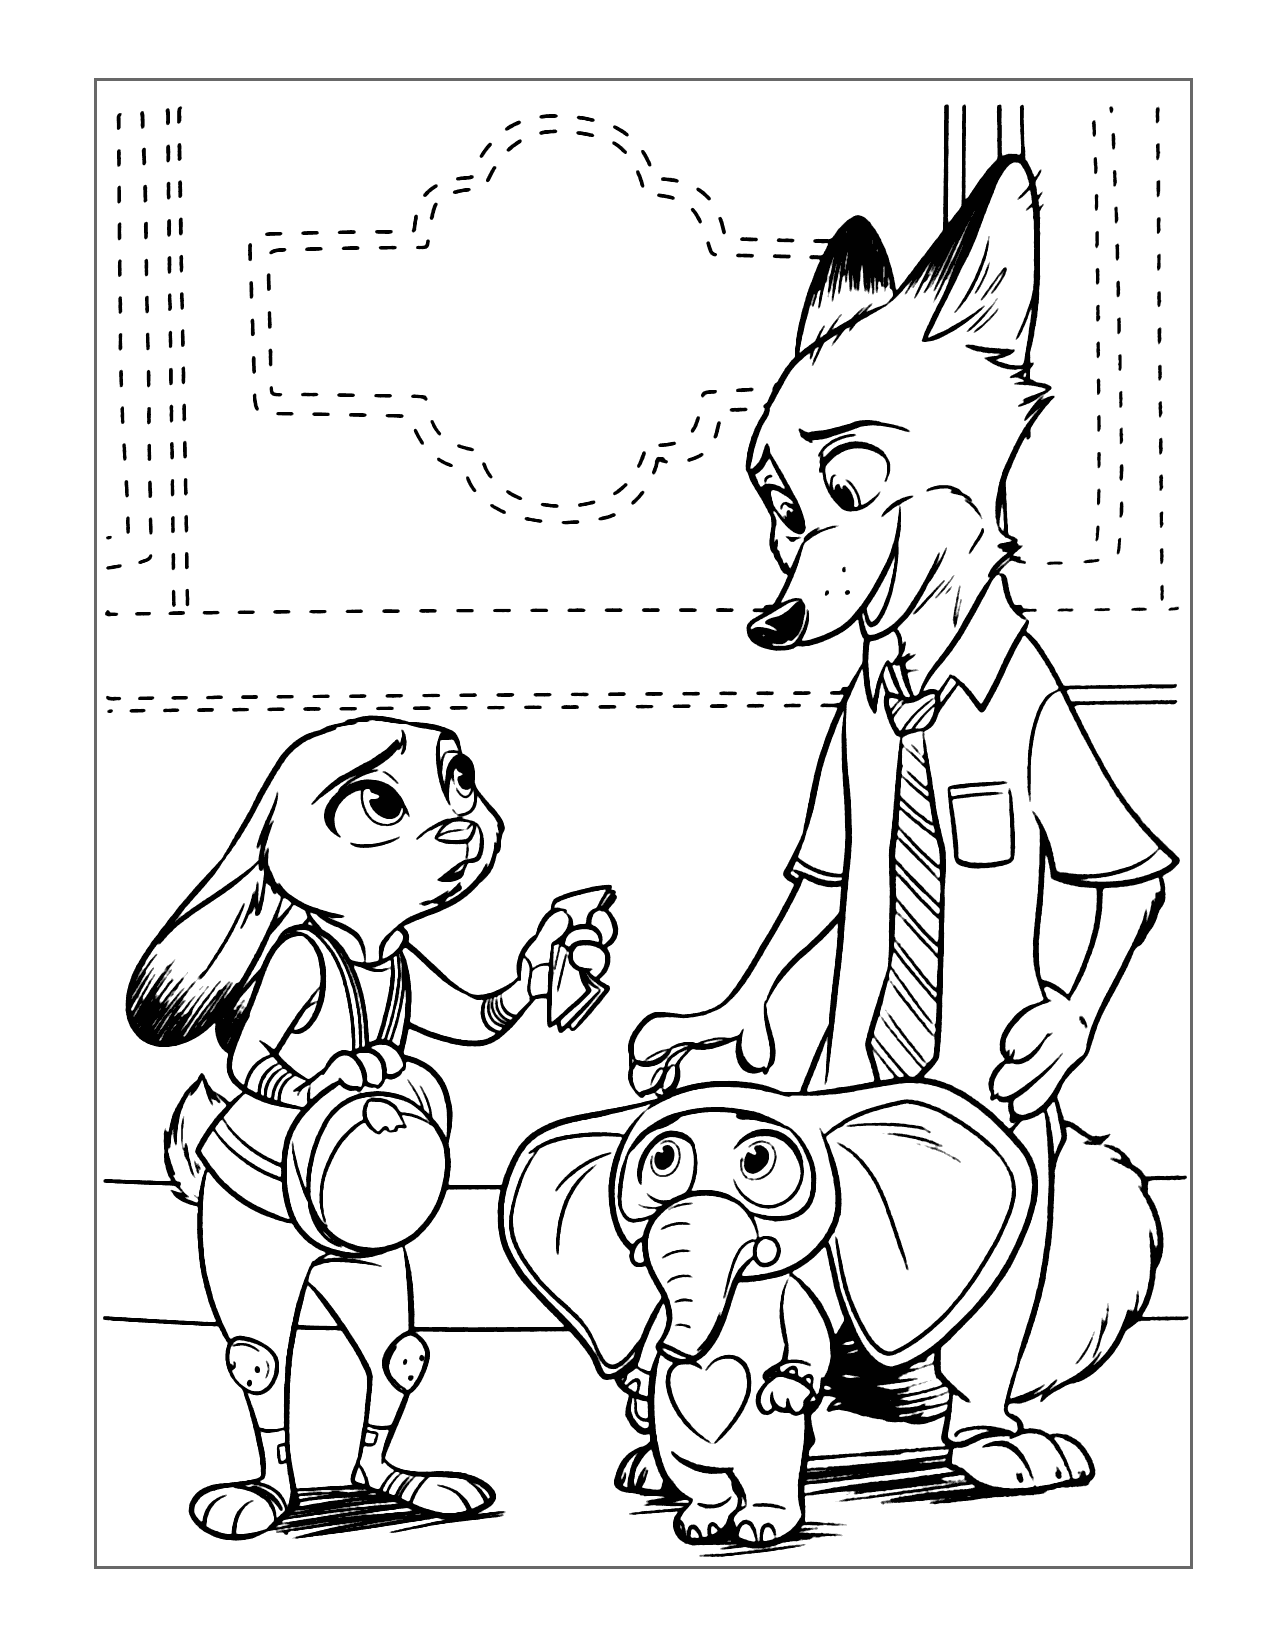 Judy Meets Nick Zootopia Coloring Page